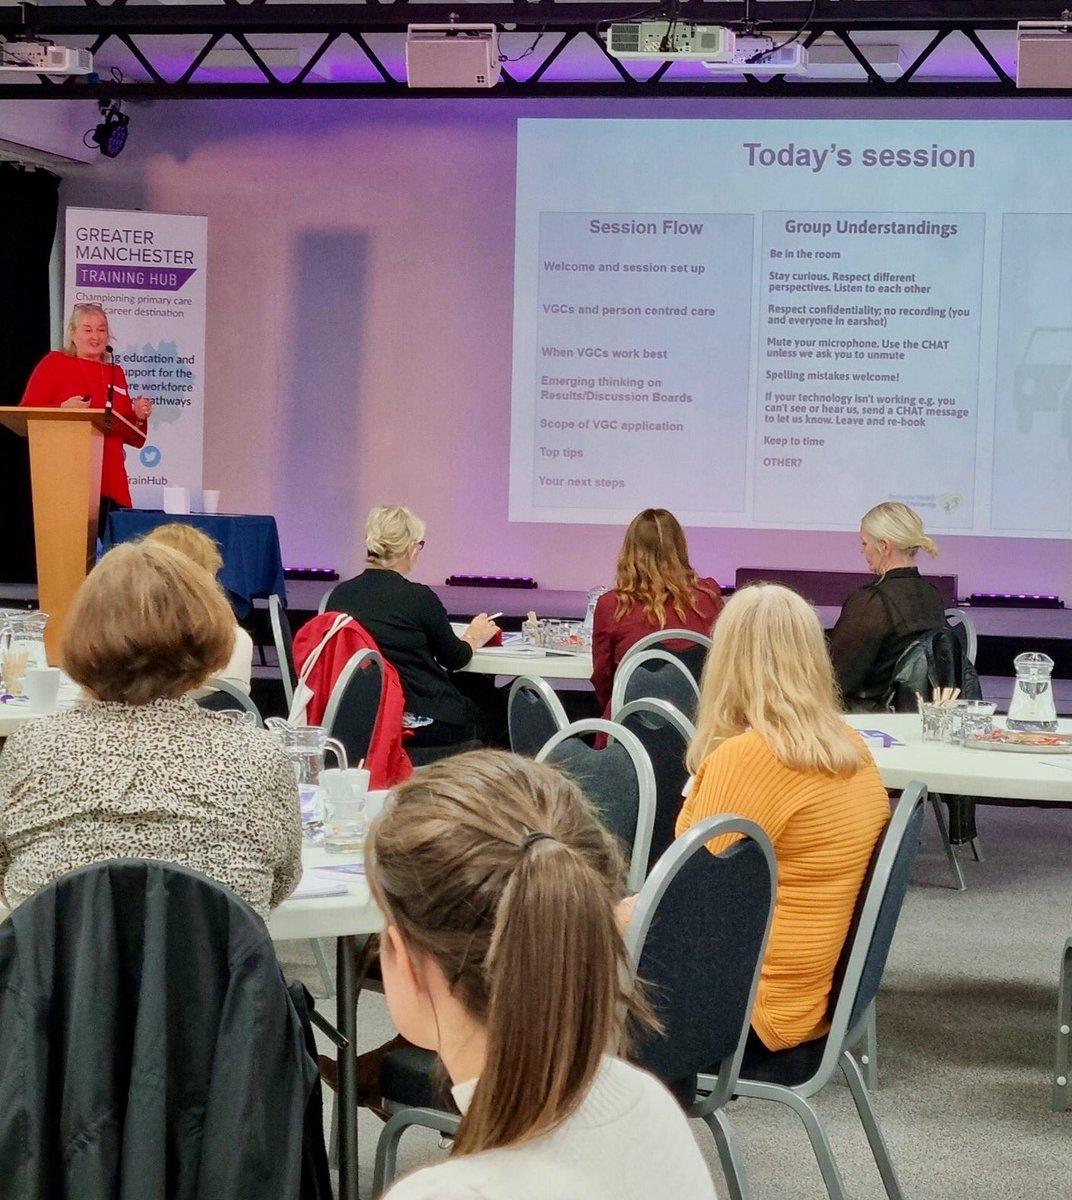 Georgina Craig, Redmoor-ELC partnership director, talking about the value of #videogroupclinics in #generalpractice at the recent @GMTrainingHUB Primary Care Conference in Manchester 
⬇️
 @redmoorhealth @ELCworks @GCAssoc #GMTHConference